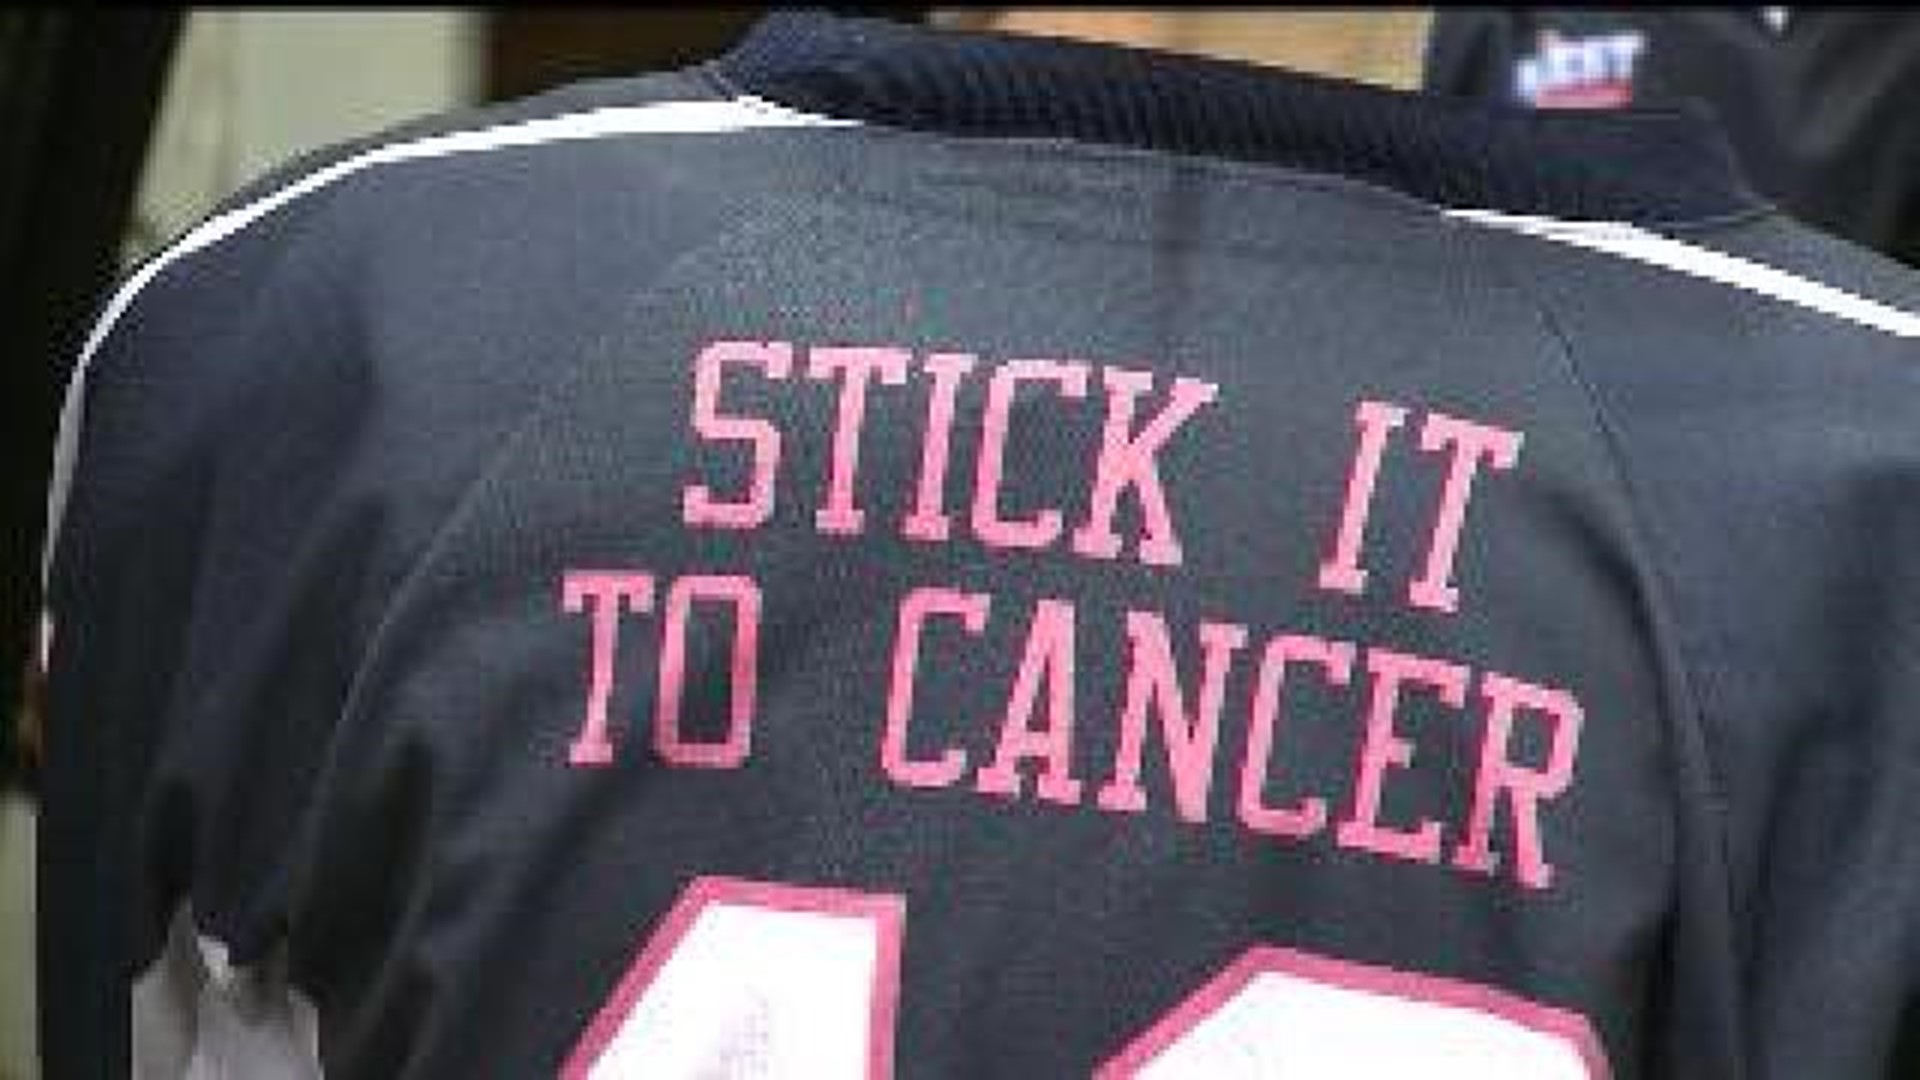 QC Hockey Players Stick It To Cancer